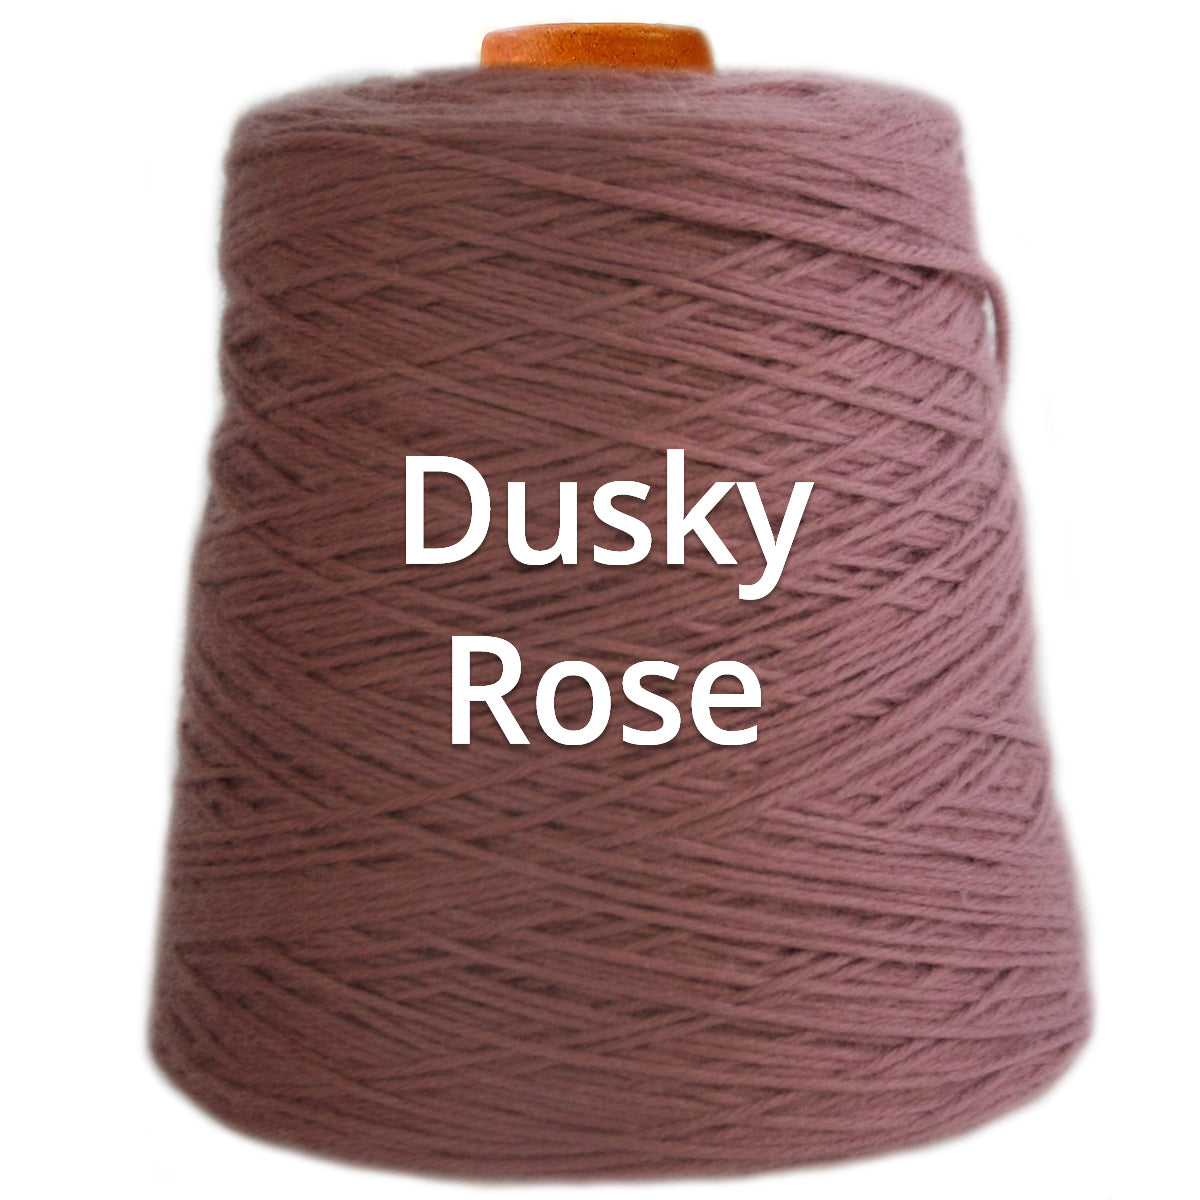 Dusky Rose - Nundle Collection - 4 Ply Sock Yarn 400g Cone